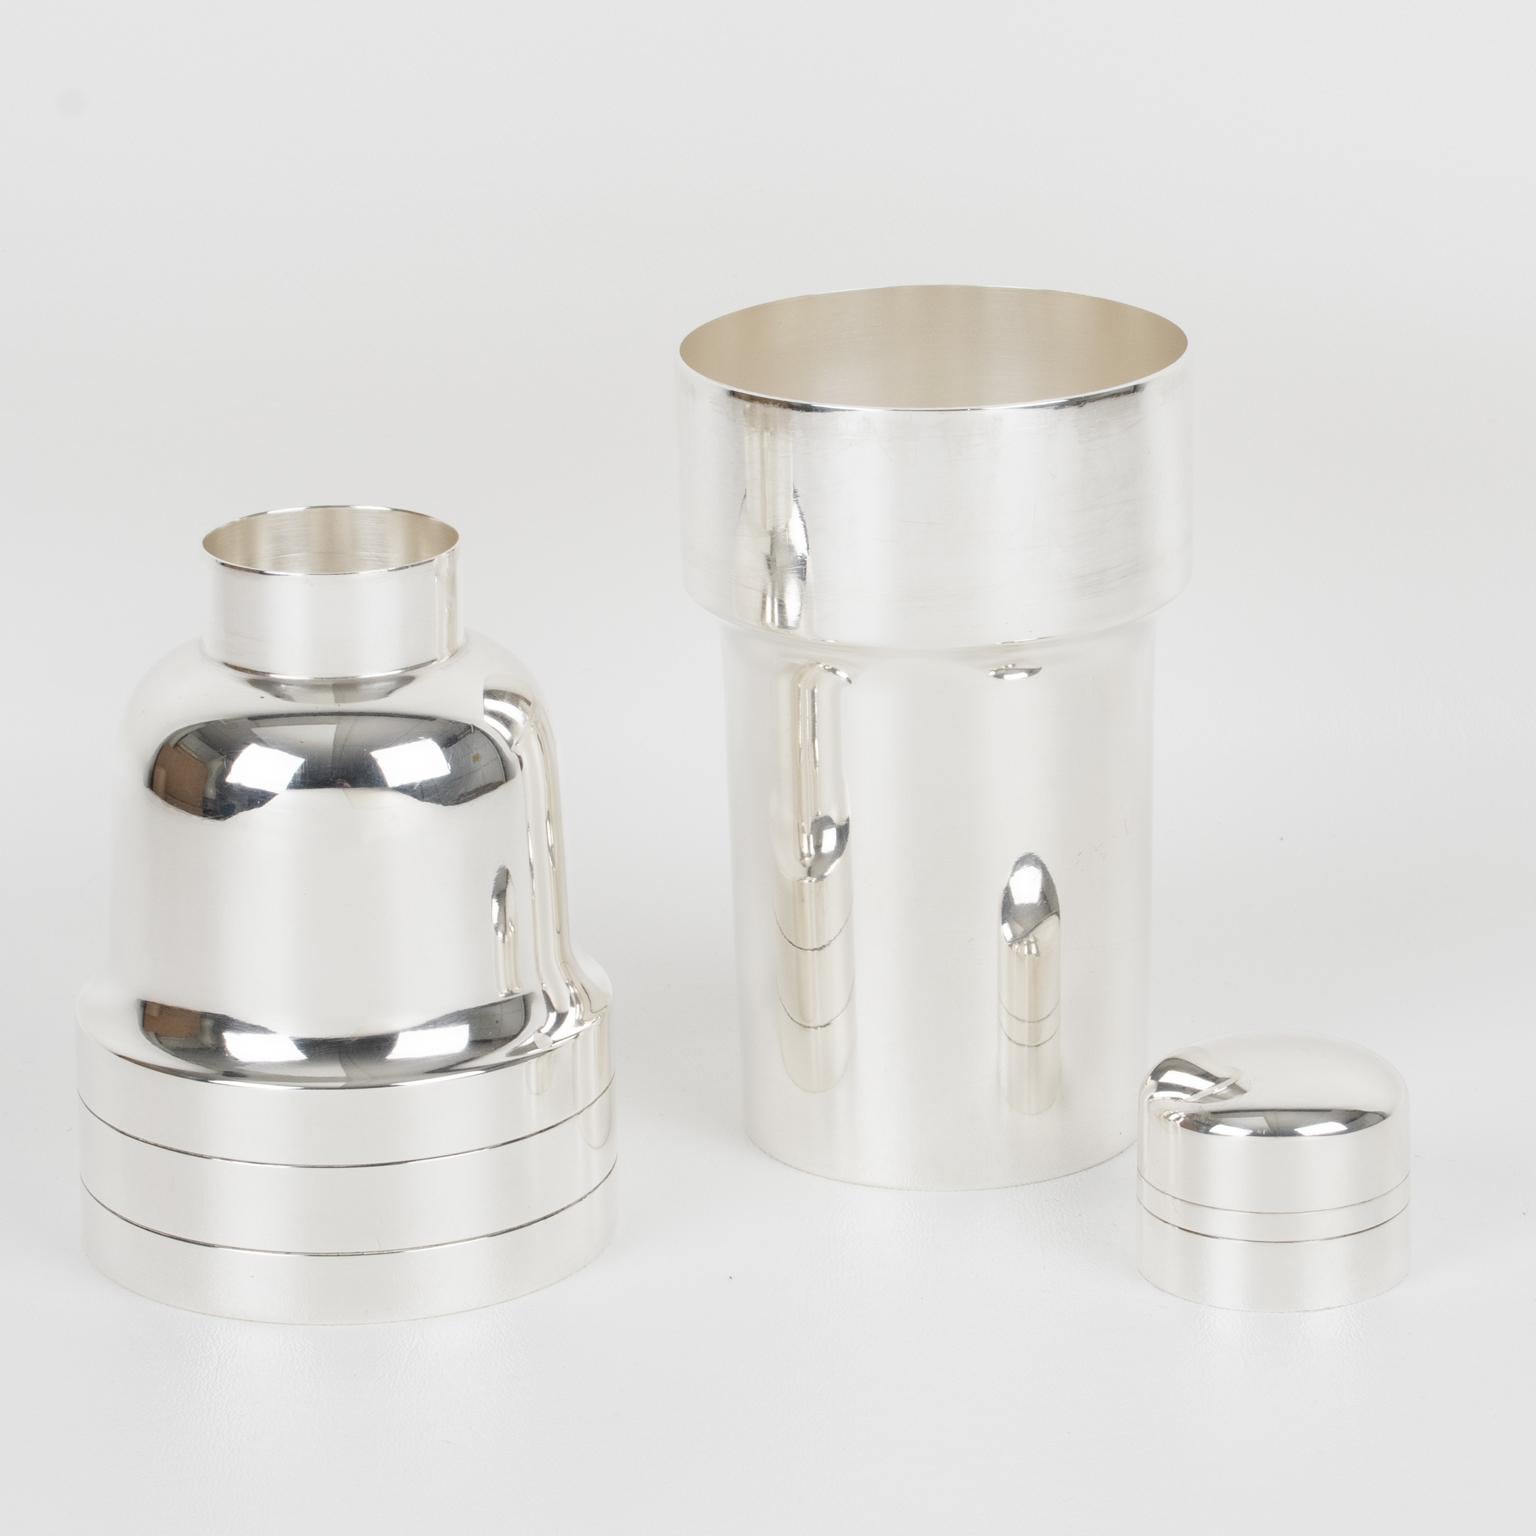 Silversmith CGF, Lyon, France, designed this lovely Art Deco silver plate cylindrical cocktail or Martini shaker. The three-sectioned cocktail shaker has a removable cap and filter strainer. The bar accessory boasts an Art Deco flair with a